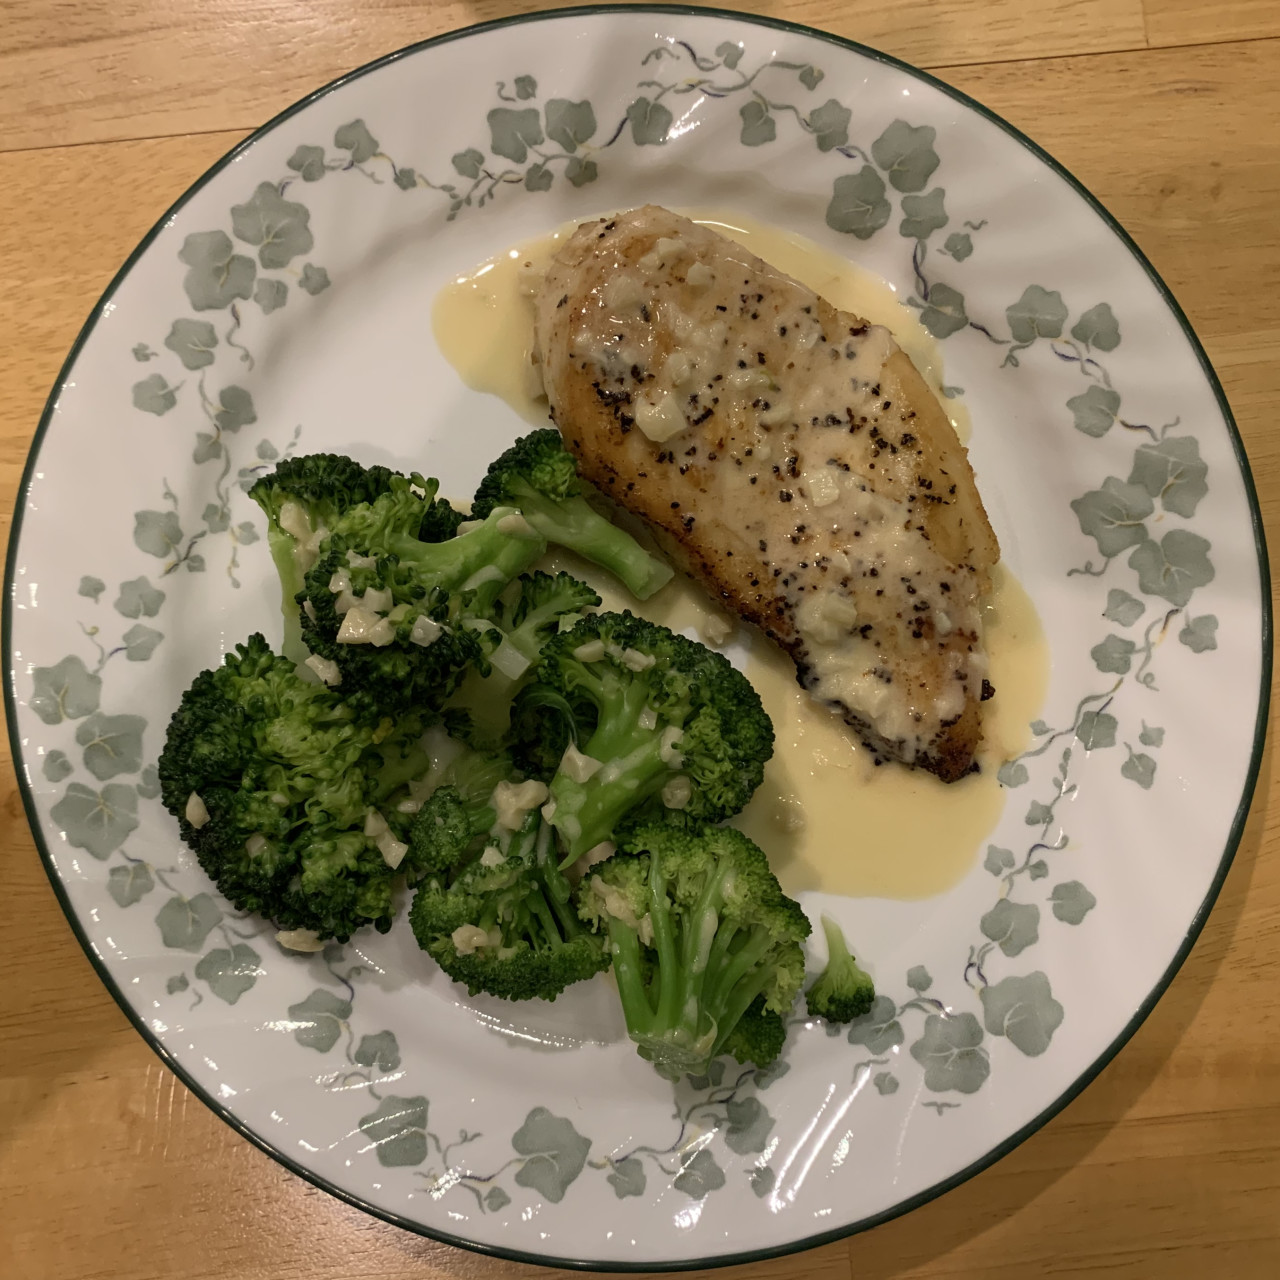 <a class="bx-tag" rel="tag" href="https://streetloc.com/view-channel-profile/whatsfordinner"><s>#</s><b>whatsfordinner</b></a> Grilled Chicken with White Wine Butter Garlic Sauce, with Broccoli